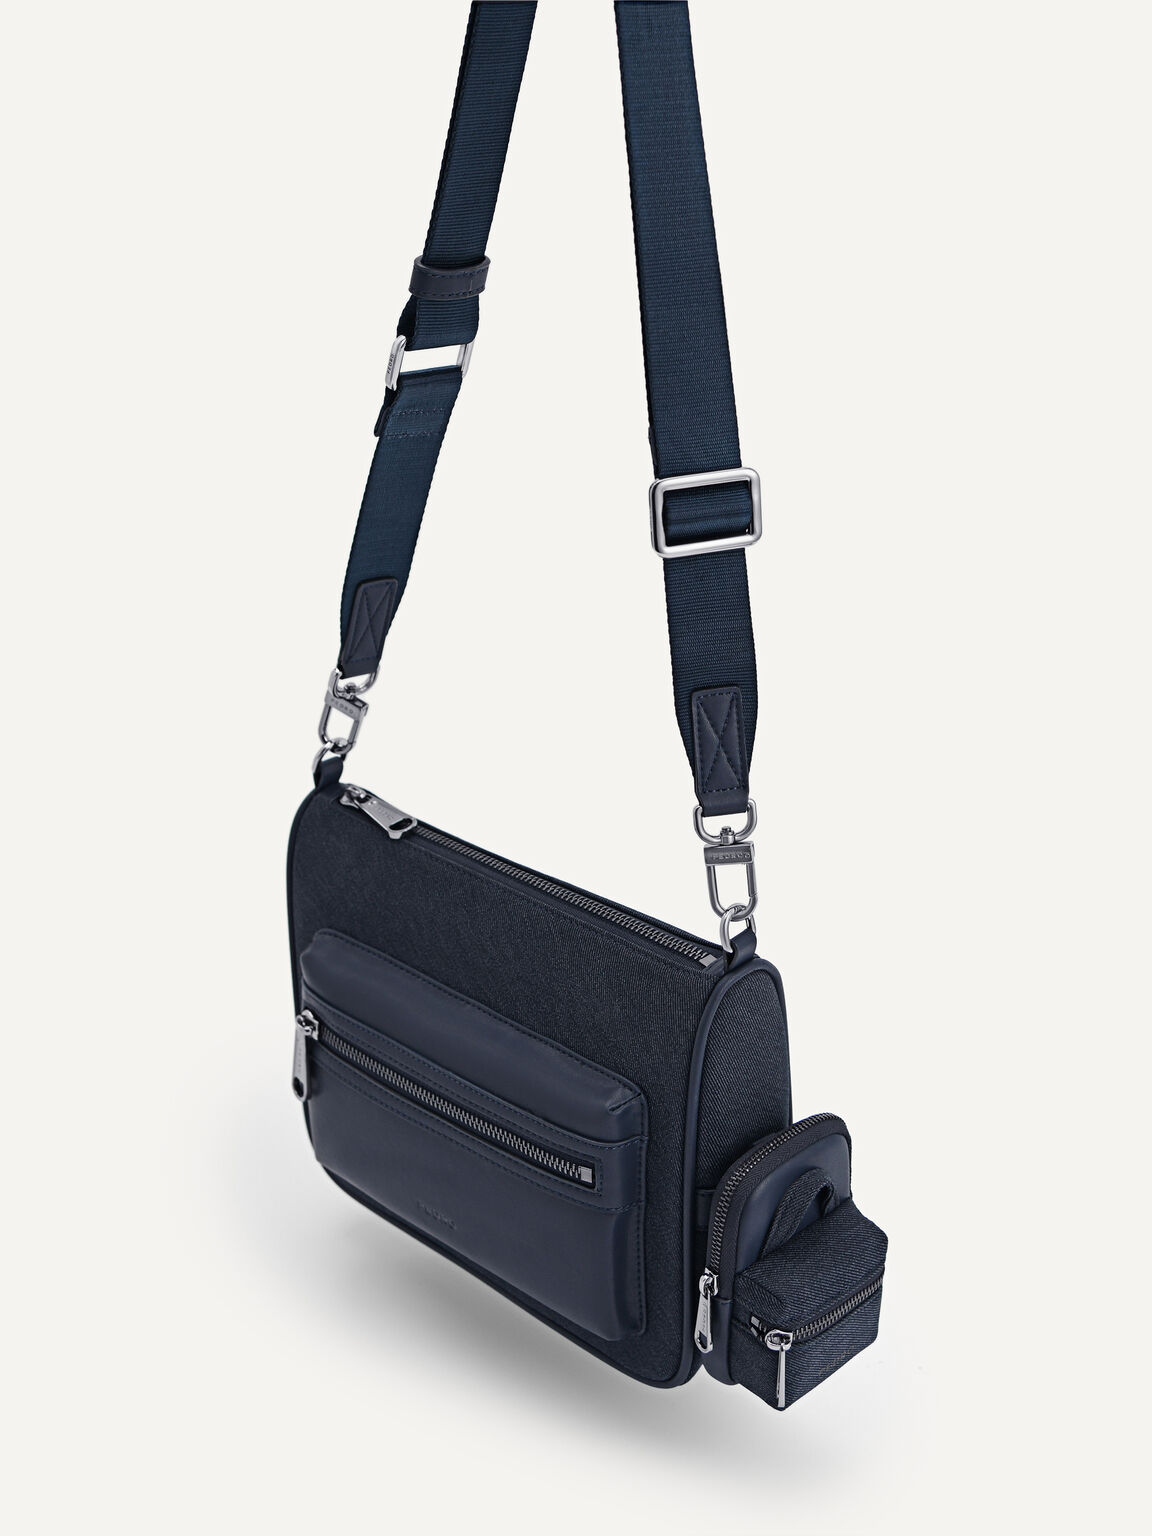 Denim Sling Bag with Pouch, Navy